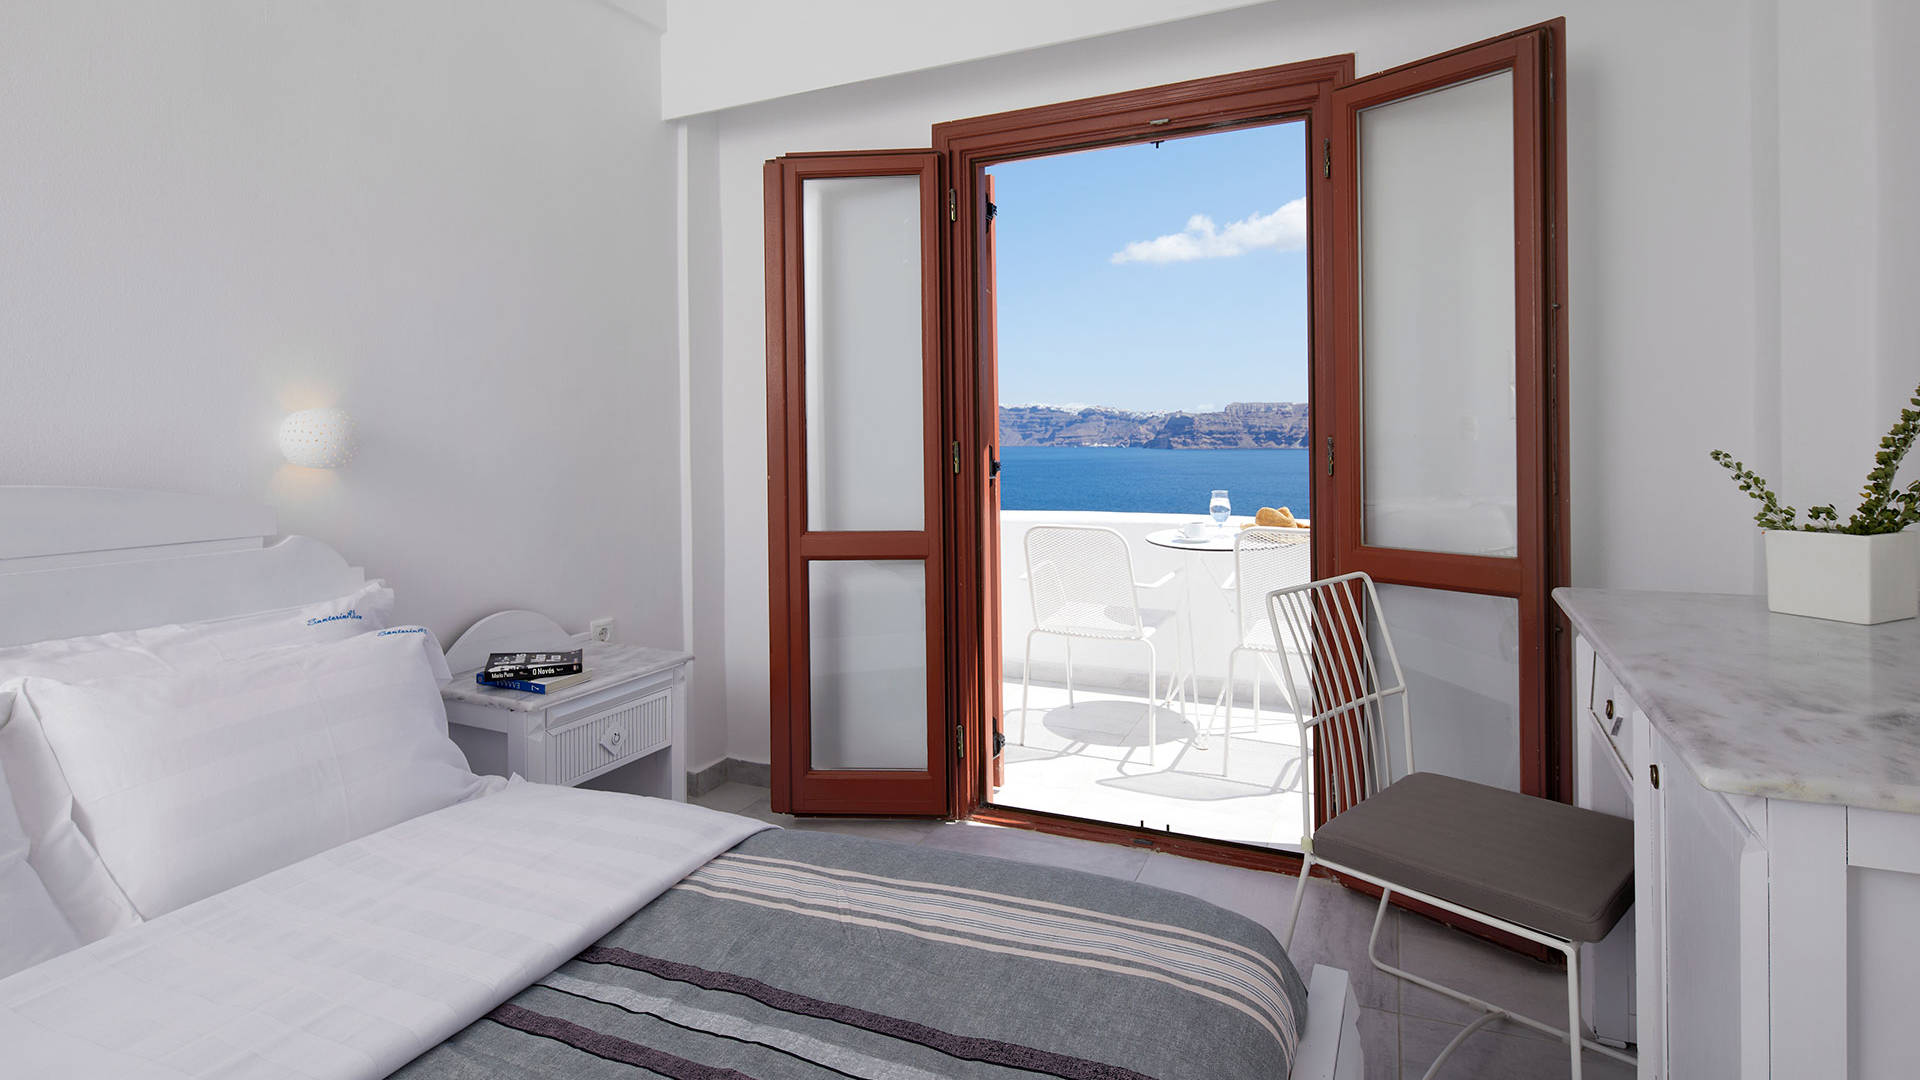 
Santorini View Hotel king size bed and balcony with sea view and white table seats